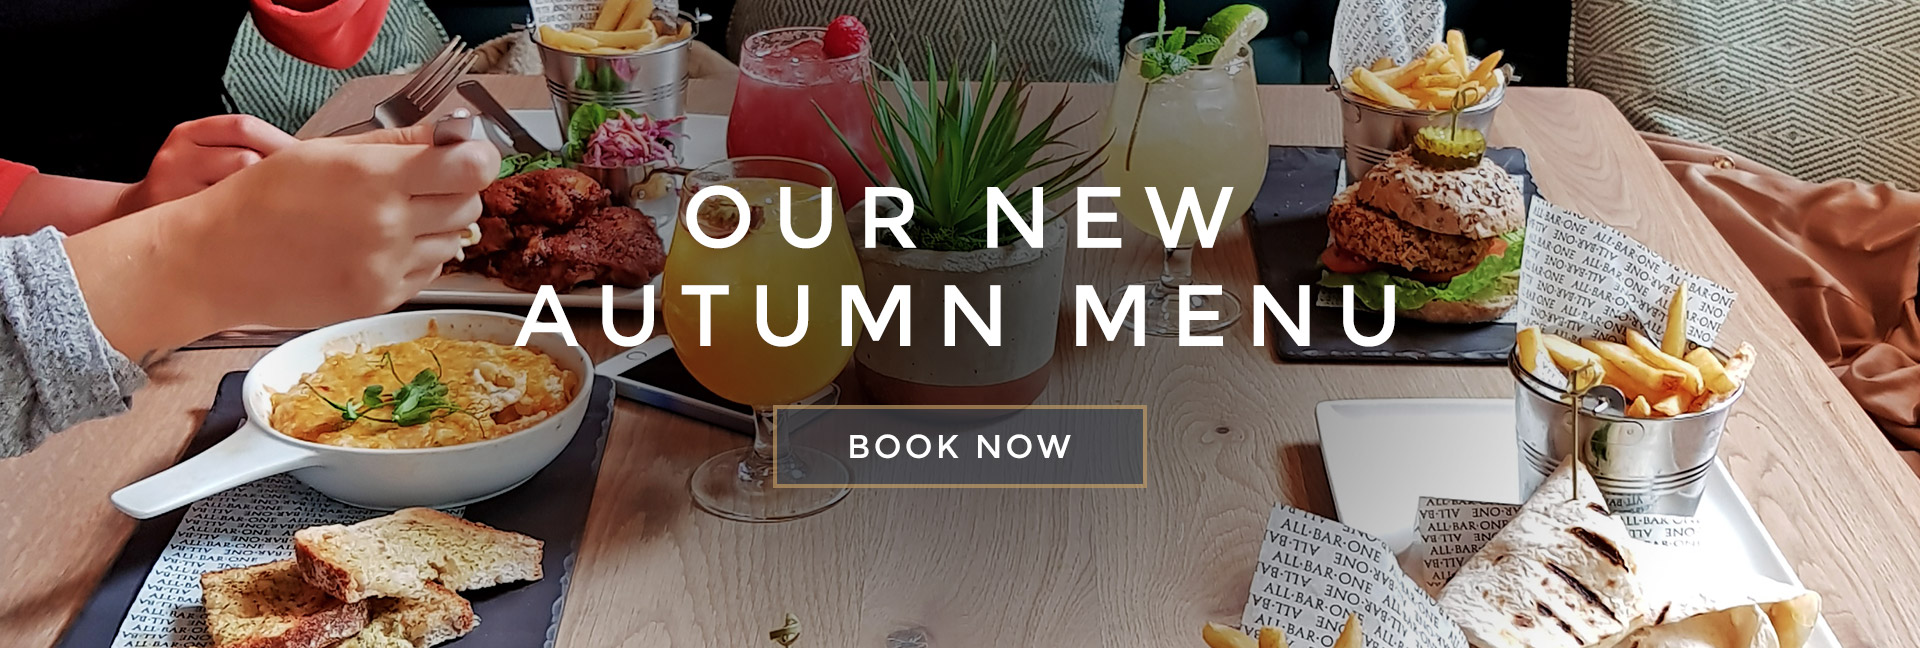 Our new Autumn menu at All Bar One Nottingham - Book now